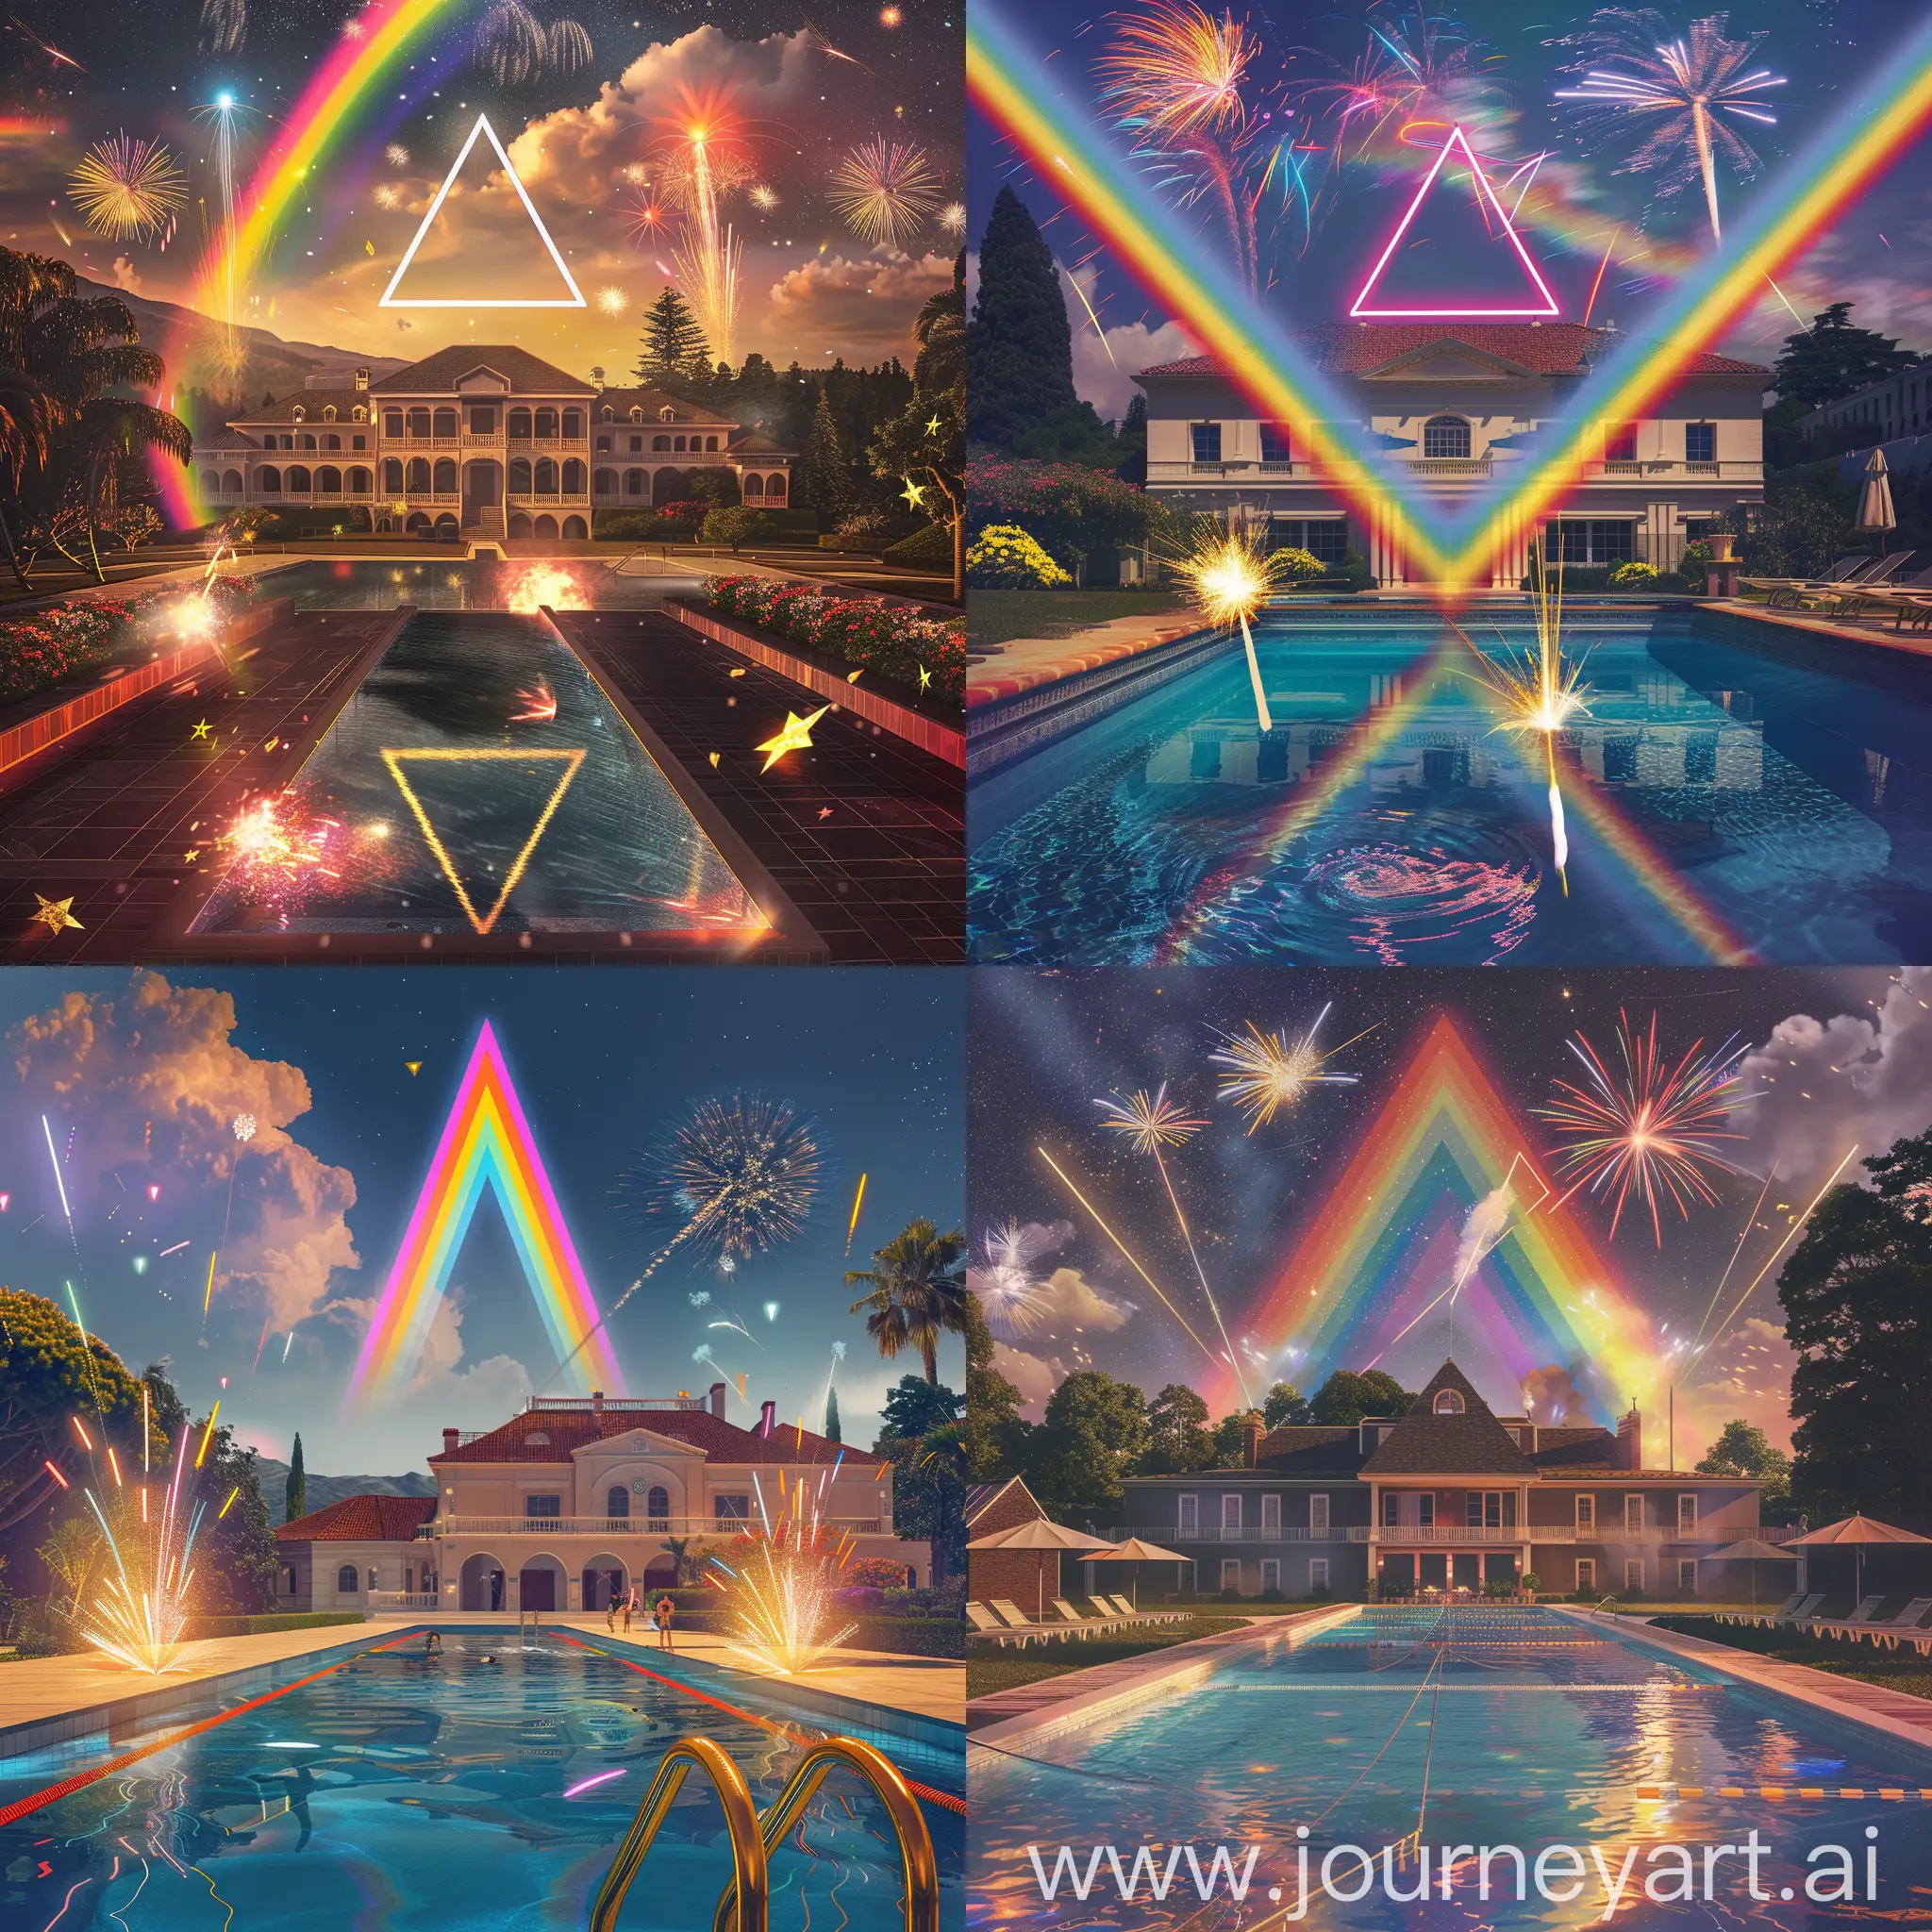 Hilarious-PRYSM-Network-Launch-Party-with-Rainbow-Mansion-and-Fireworks